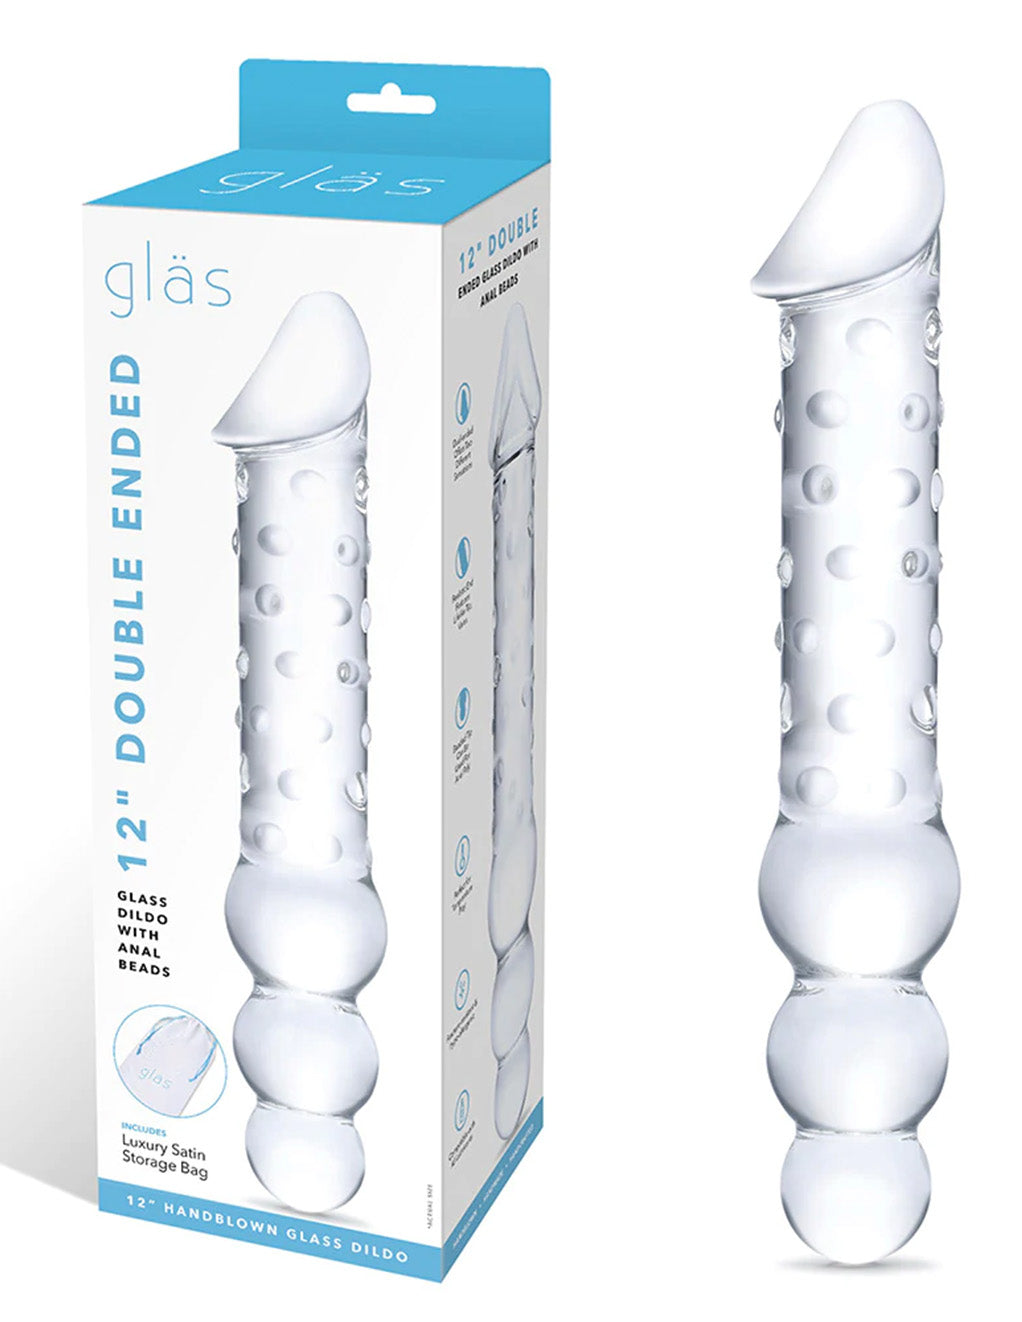 caitlyn parsons recommends 12 inch glass dildo pic